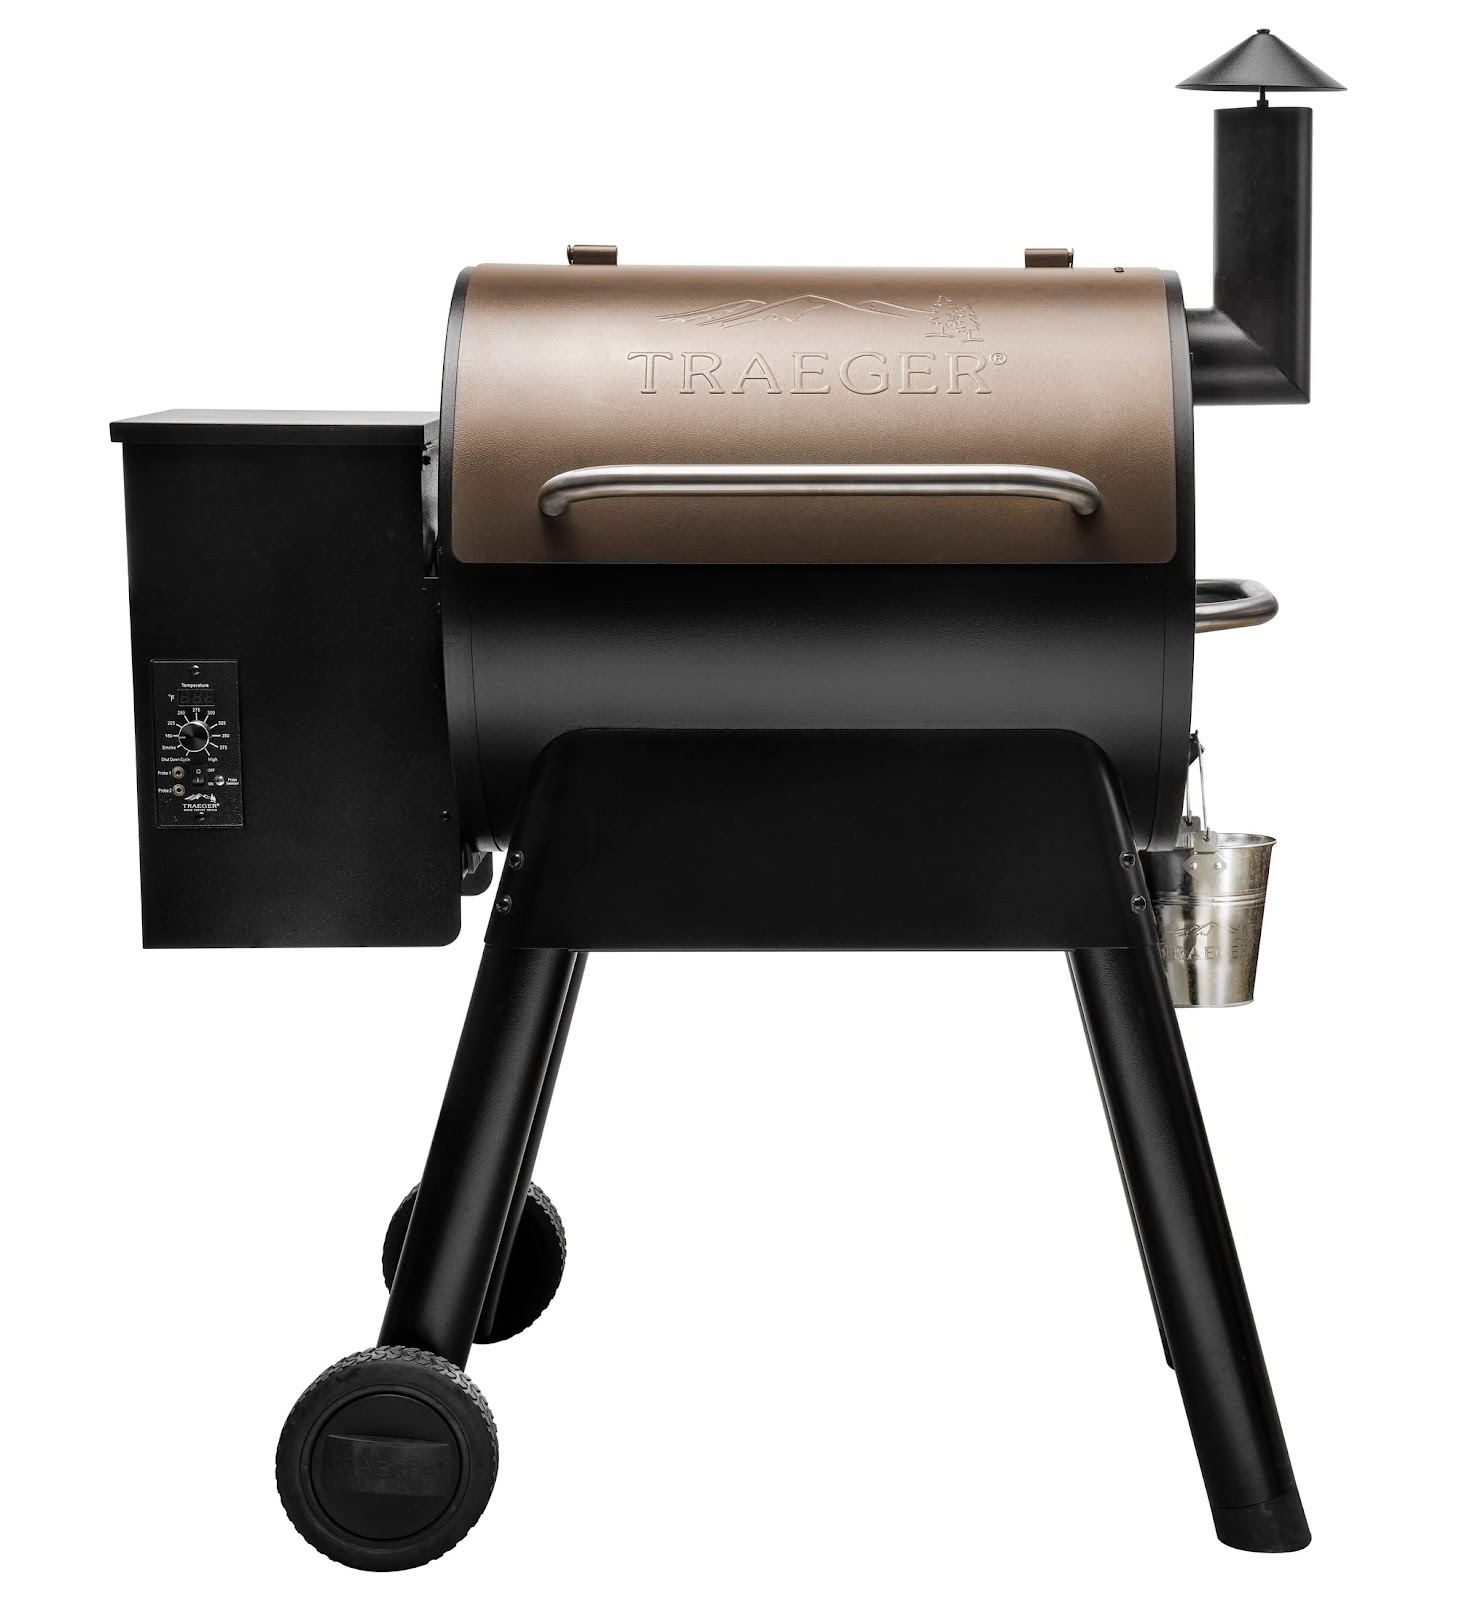 Traeger Grills Pro Series 22 Electric Wood Pellet Grill and Smoker